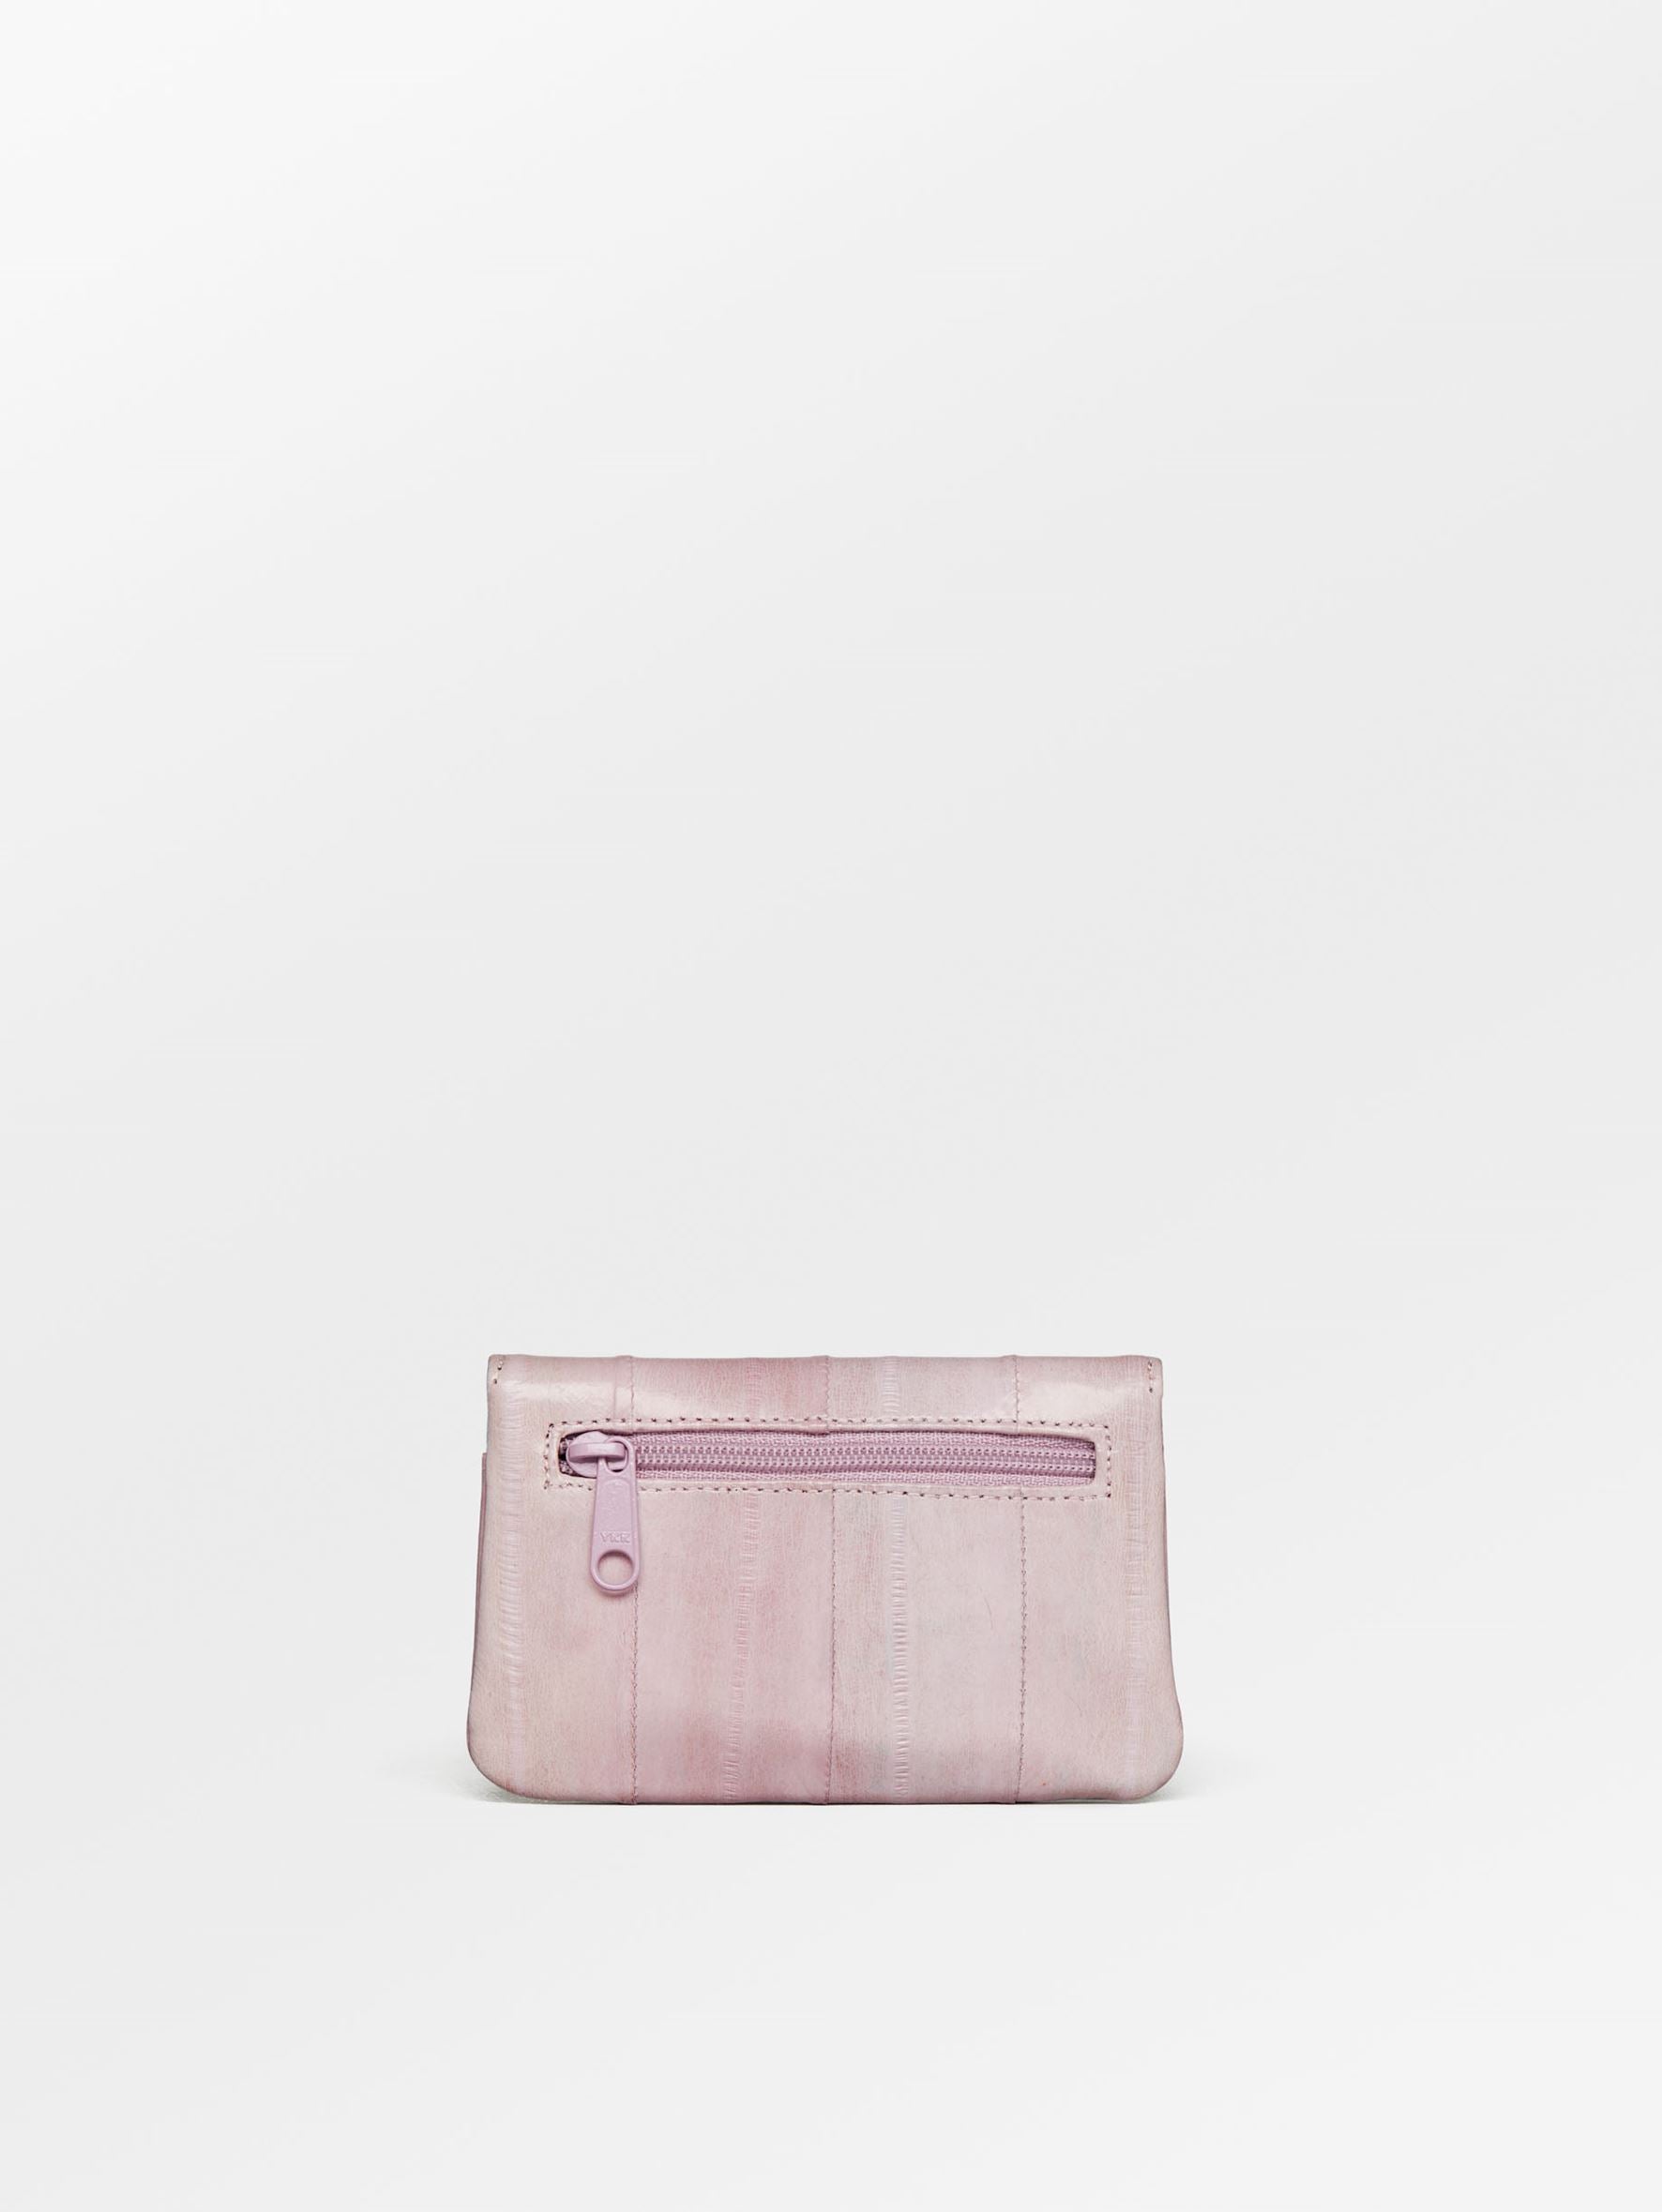 Valentino Bags quilted cross body bag with chain strap in light pink | ASOS